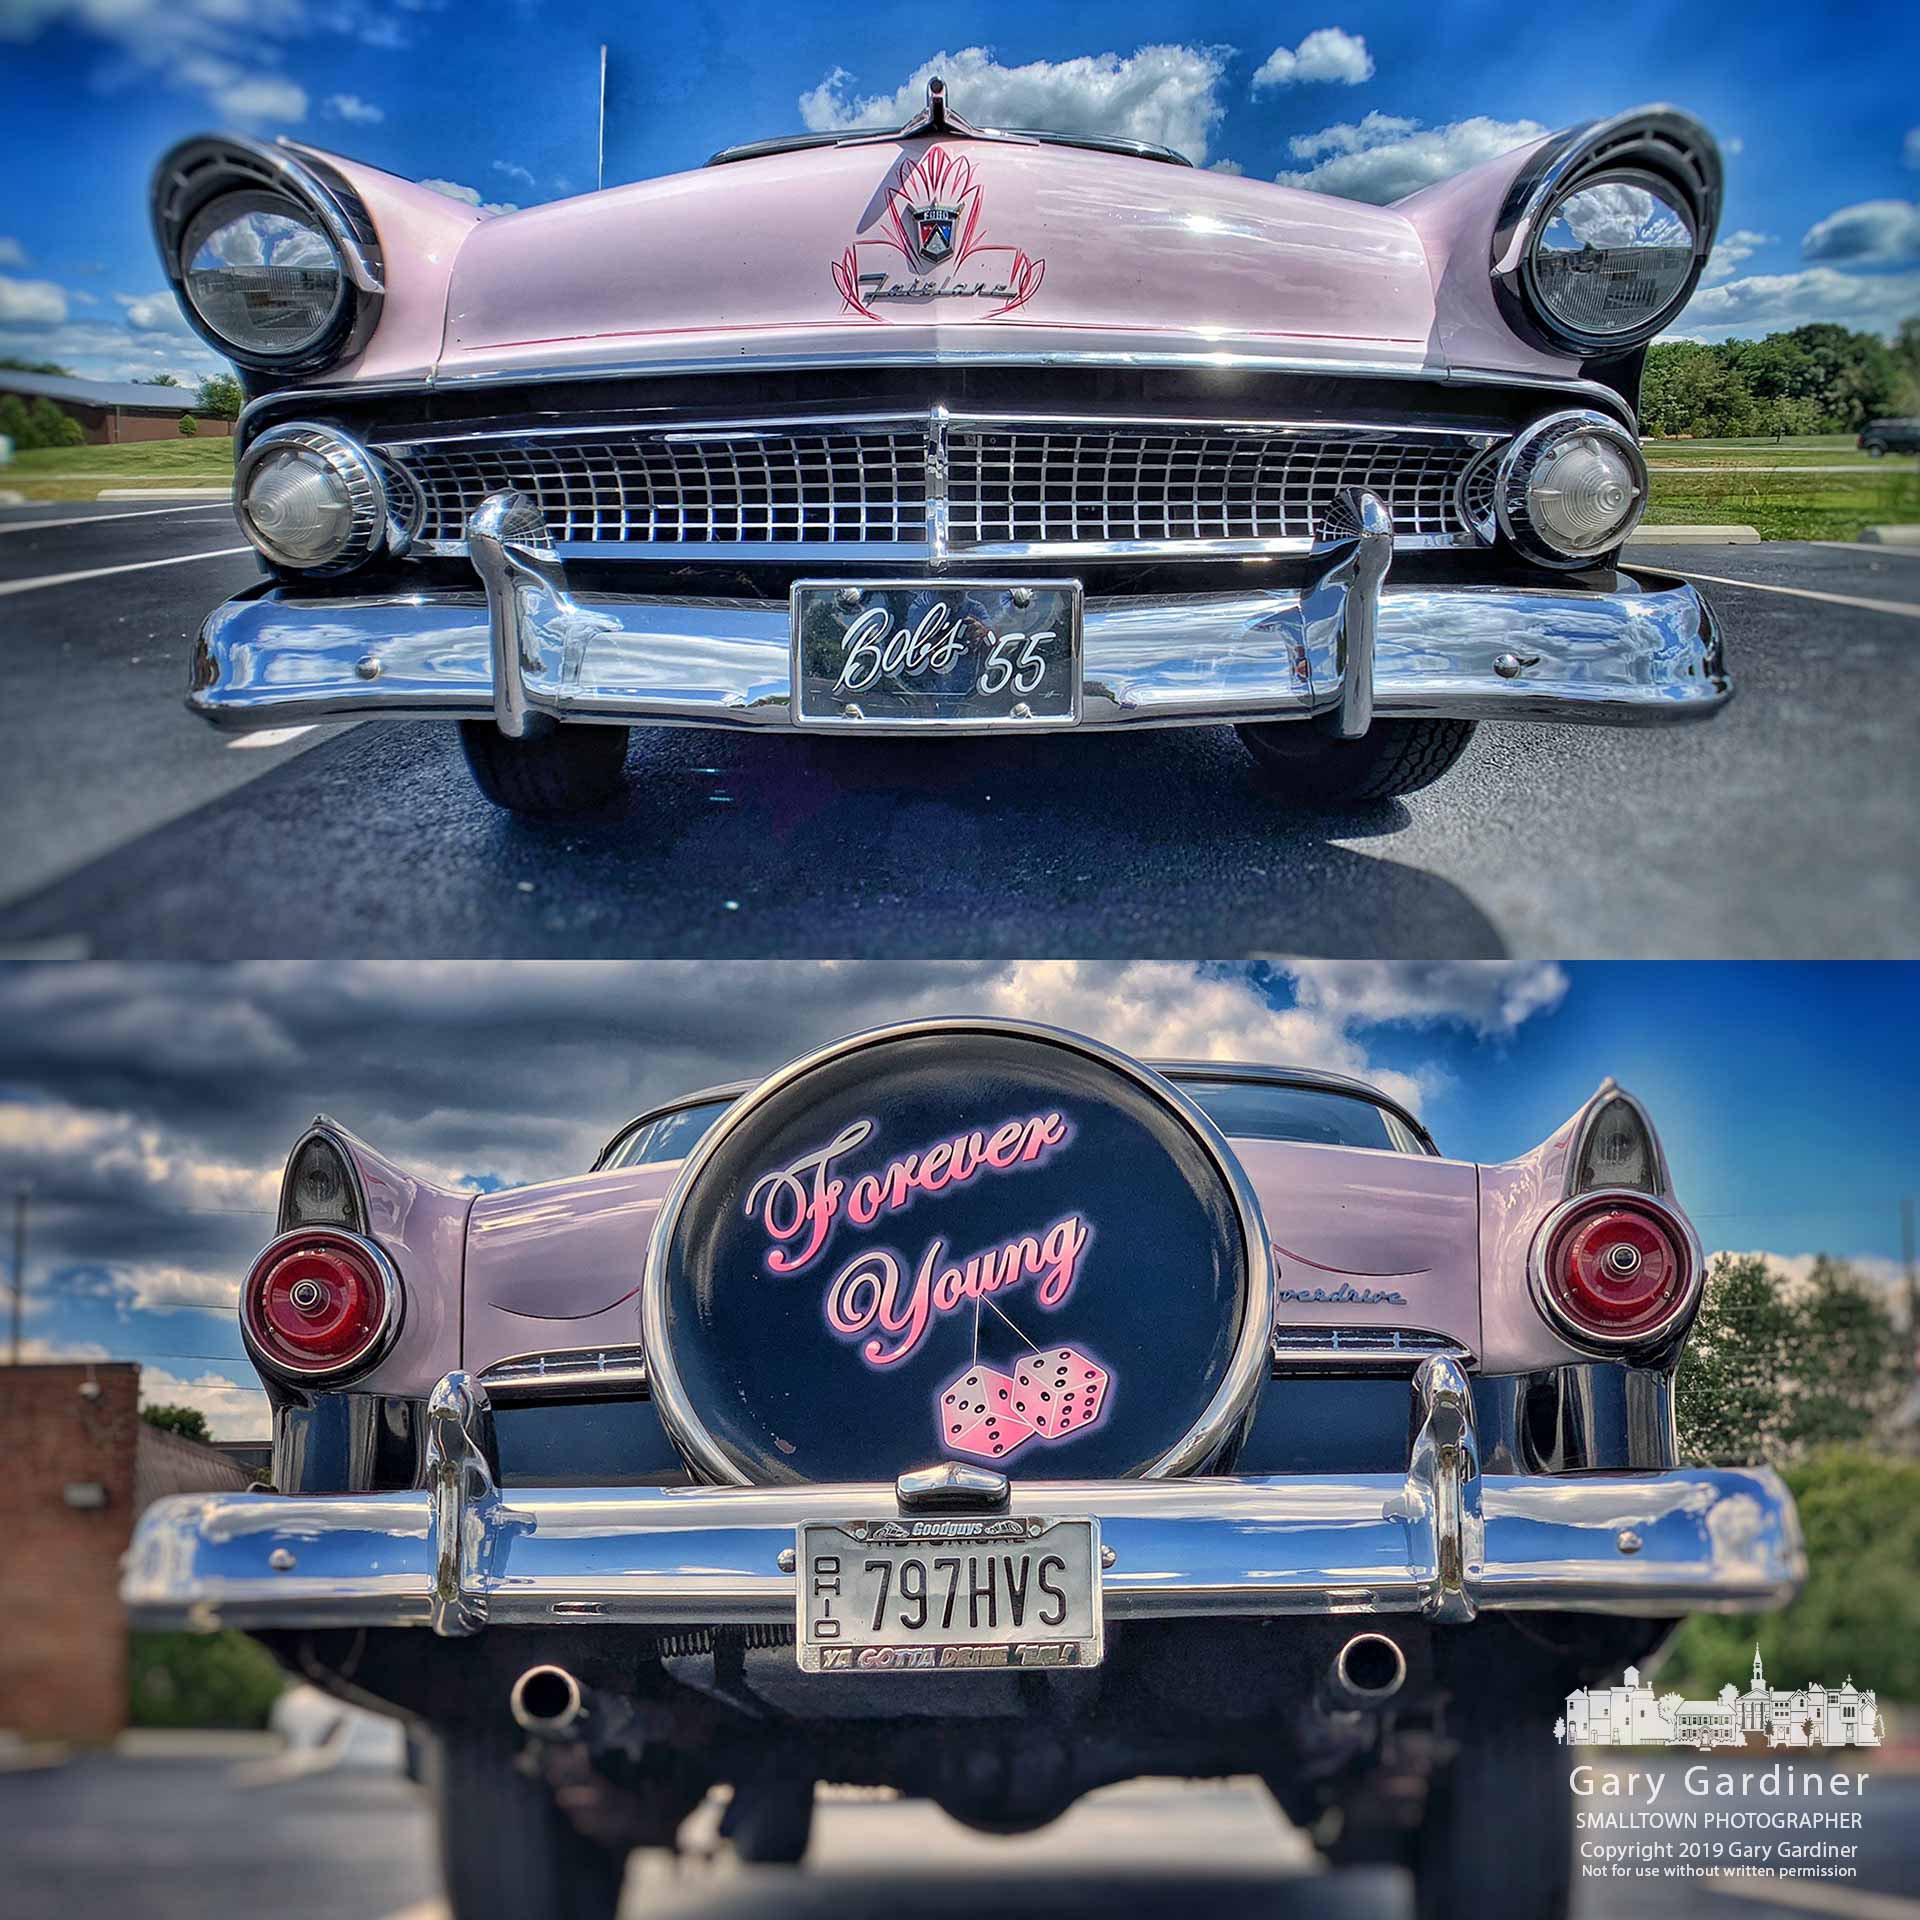 A 1955 Ford Crown Victoria sits in the parking lot at the Blendon Senior Center at the end of the car show marking Heritage Days in the township. My Final Photo for Aug. 24, 2019.